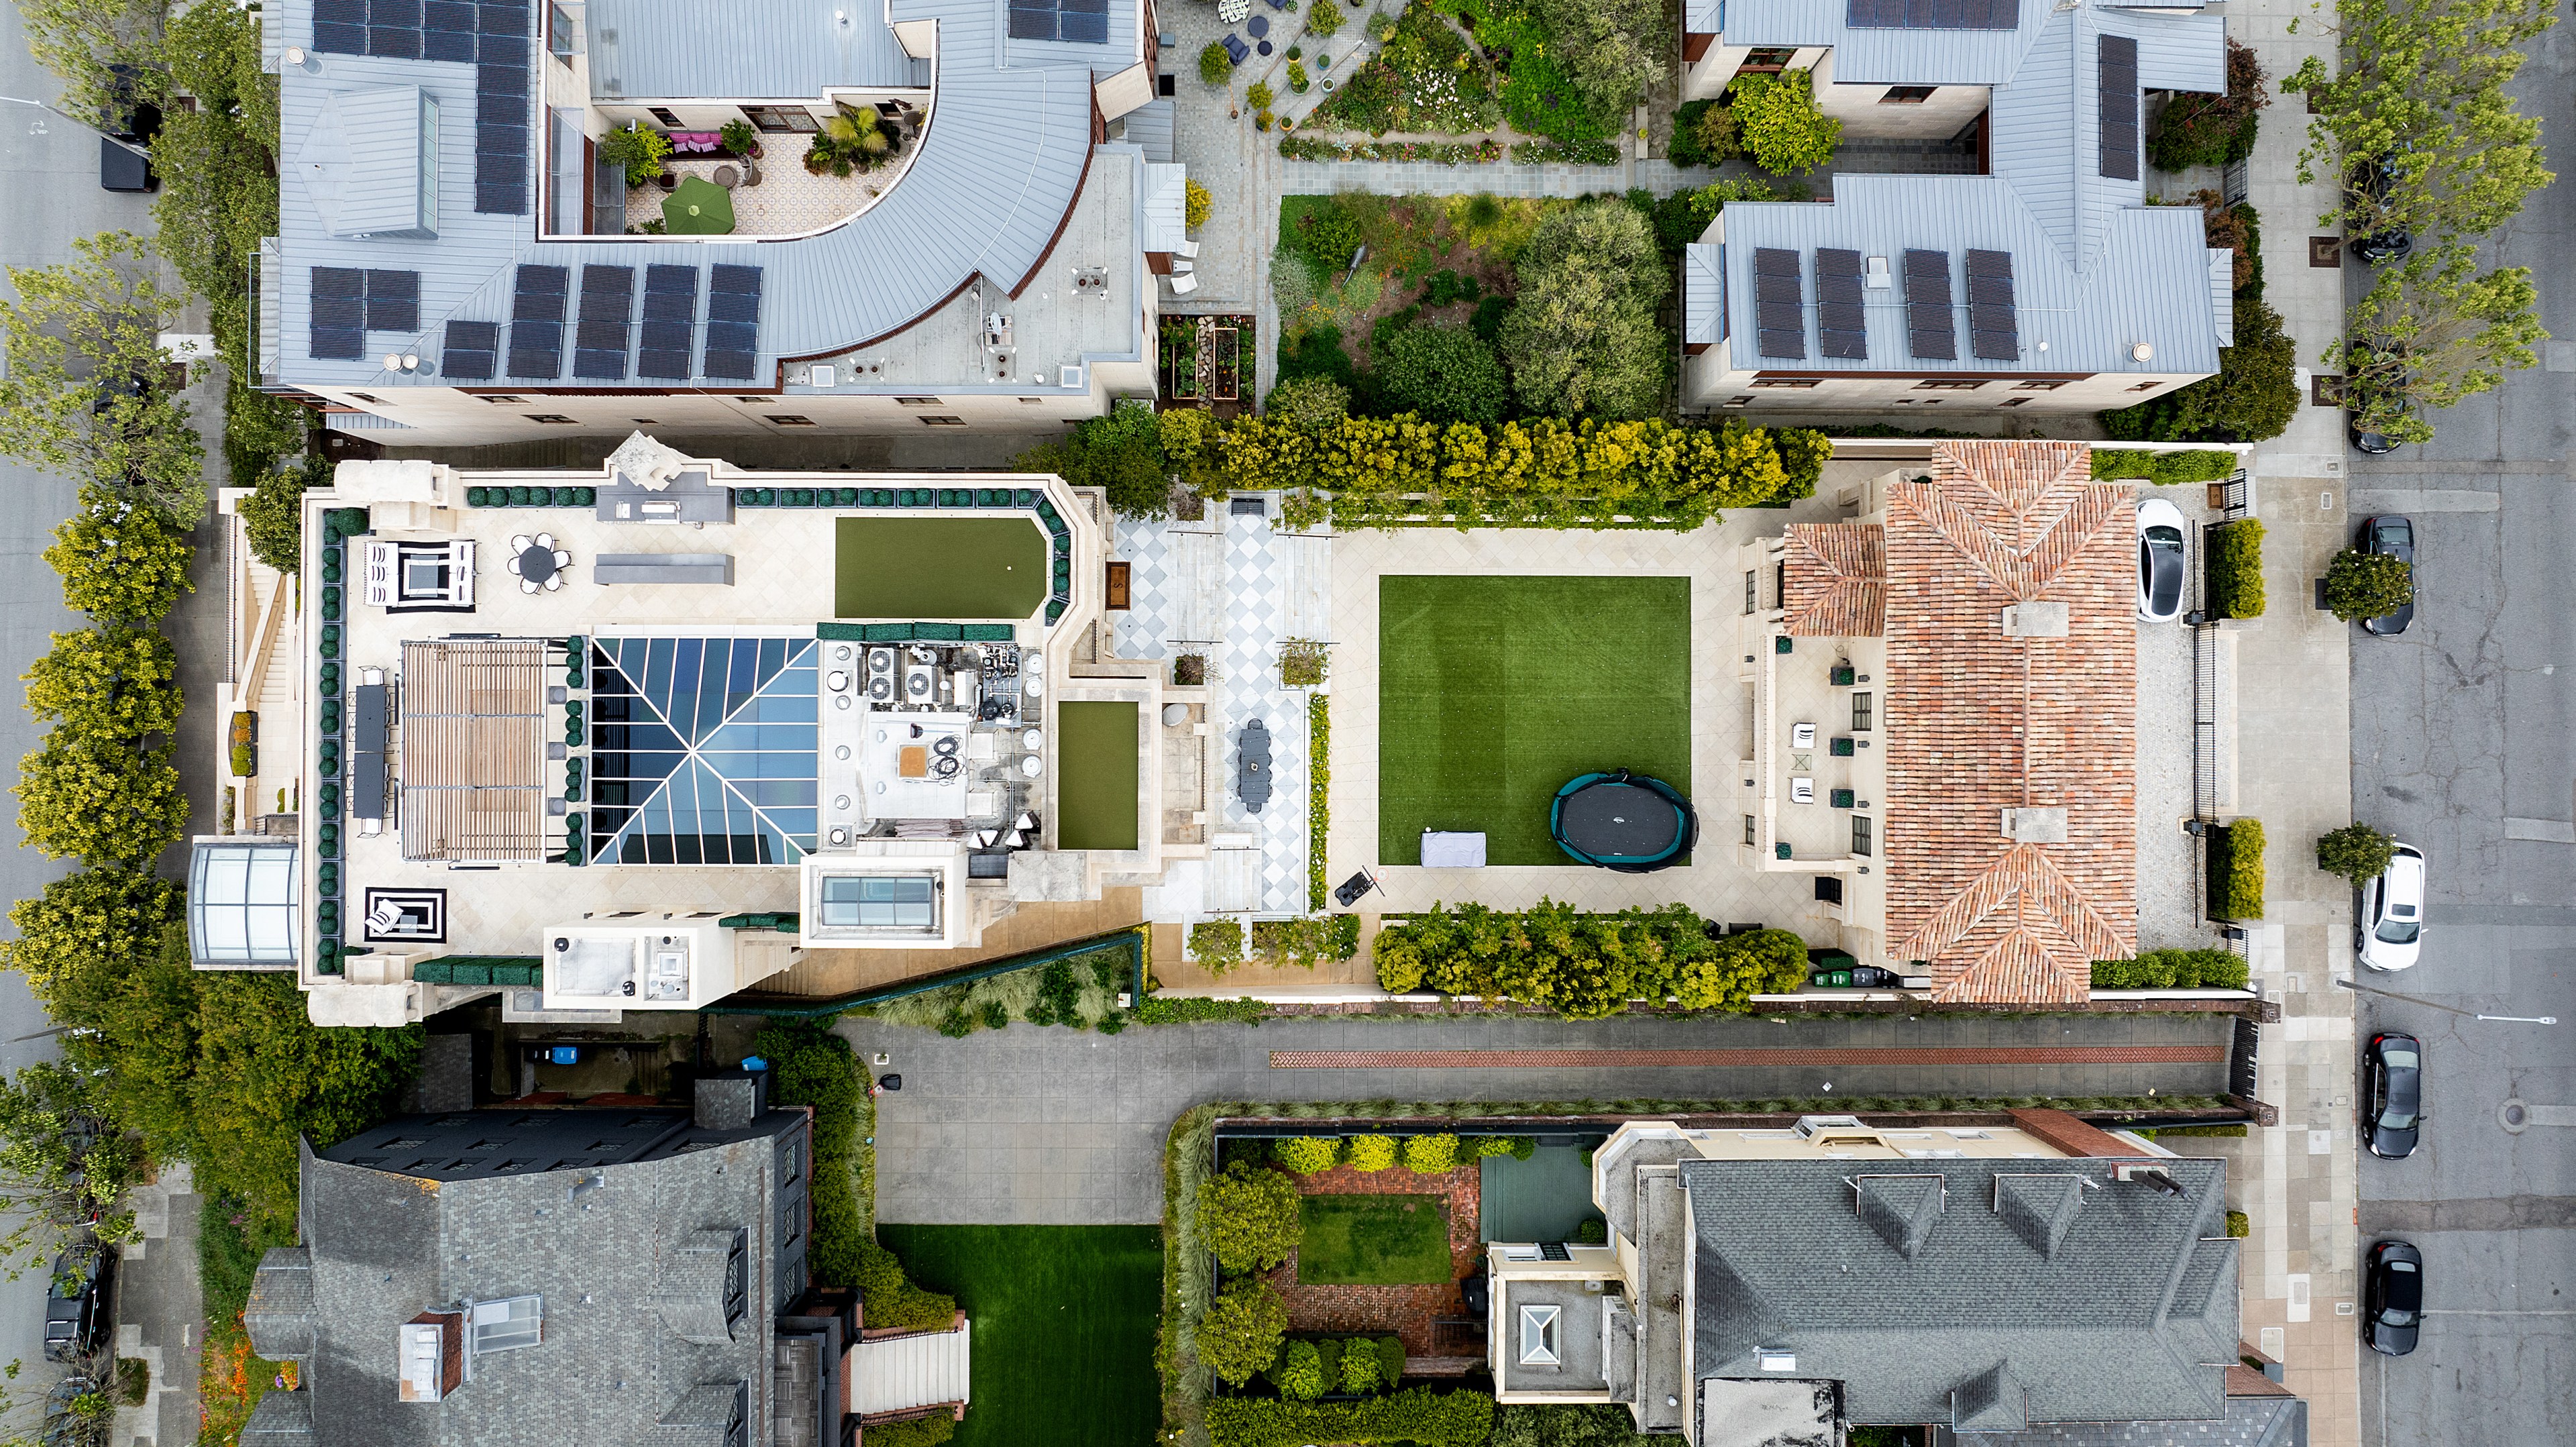 An aerial view shows a modern house with a rooftop patio, solar panels, outdoor furniture, and lawns. Surrounding homes and streets with parked cars are visible.